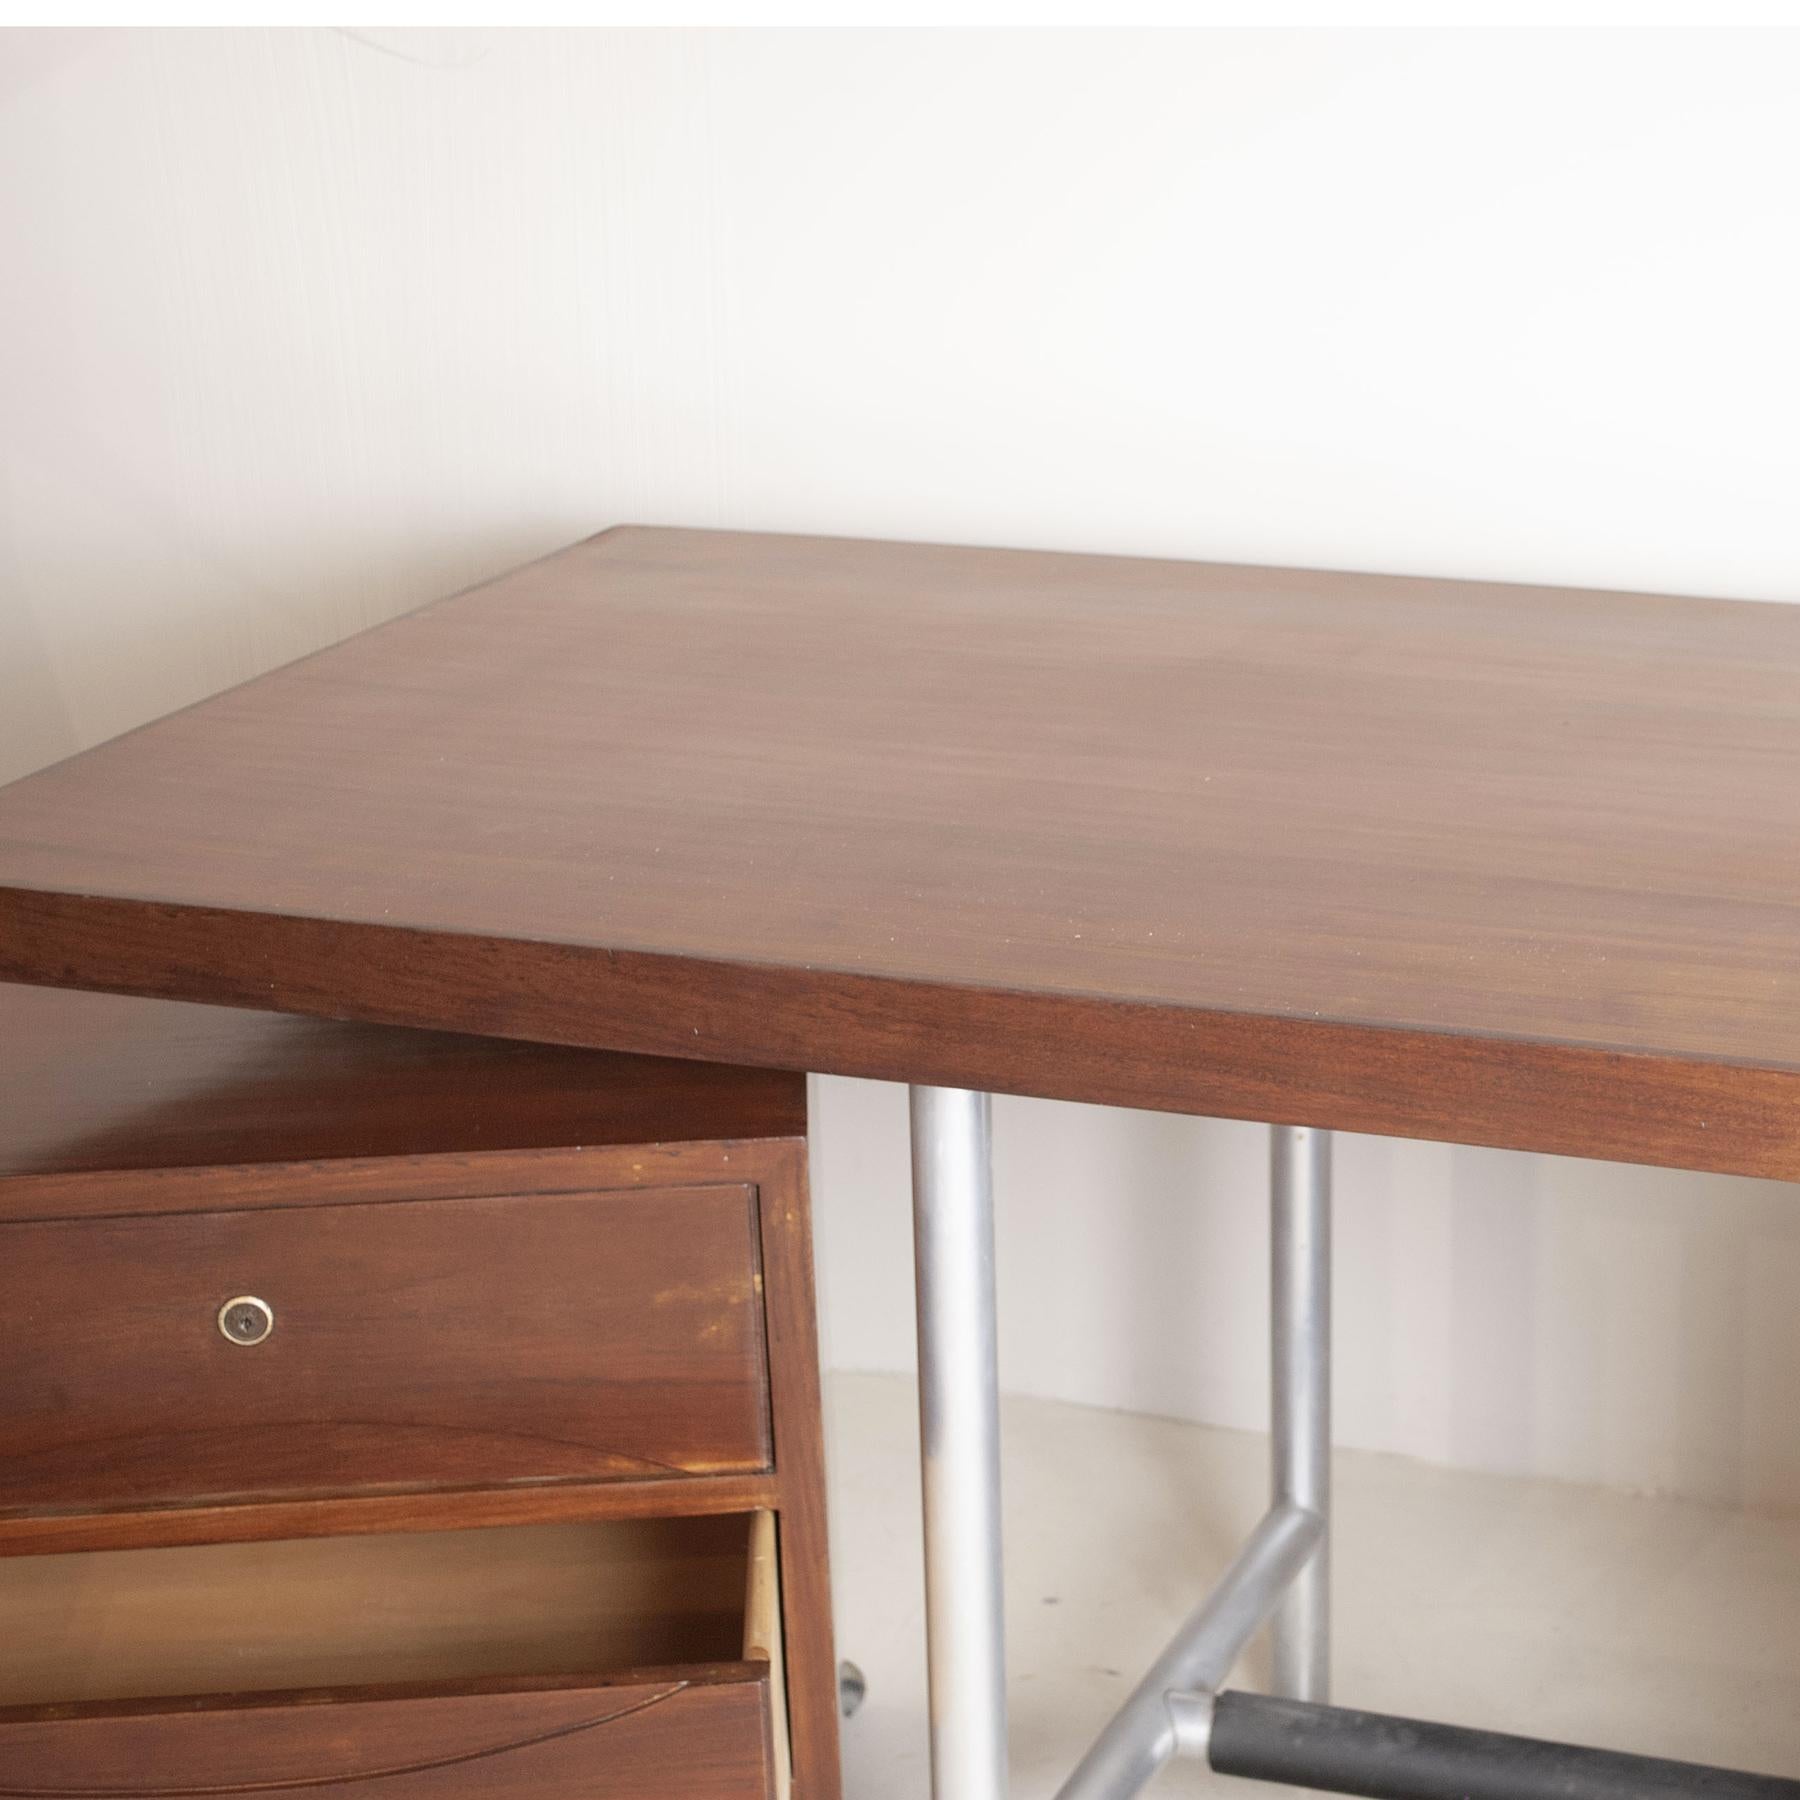 Italian Mid-Century Walnut Desk from the Sixties In Good Condition For Sale In bari, IT